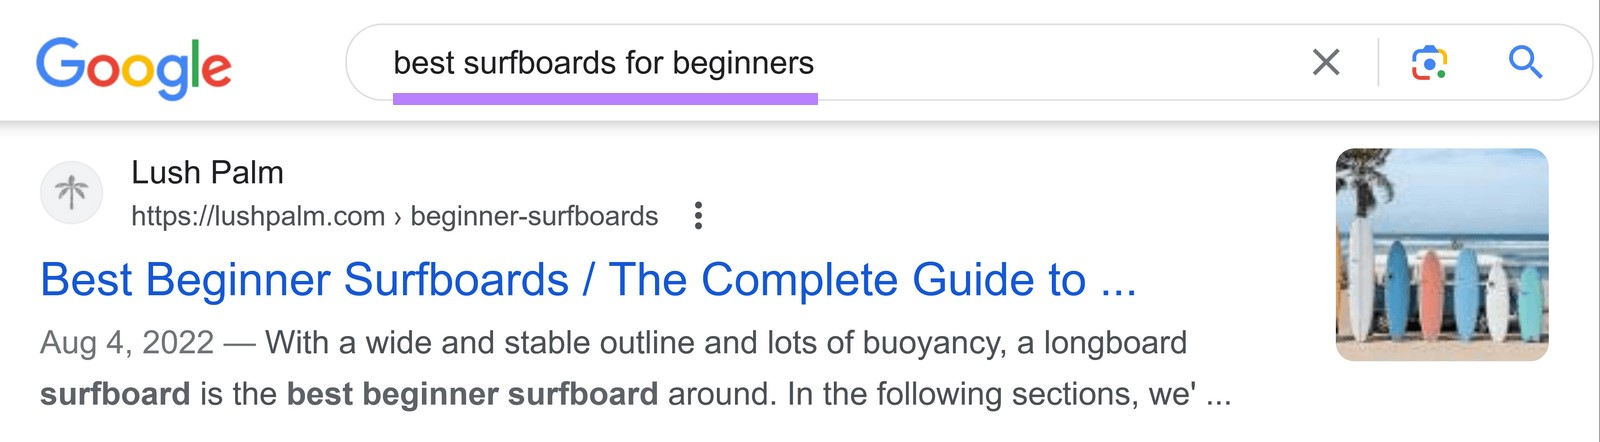 Google search results for “best surfboards for beginners” shows a post "Best Beginner Surfboards / The Complete Guide to..." by Lush Palm